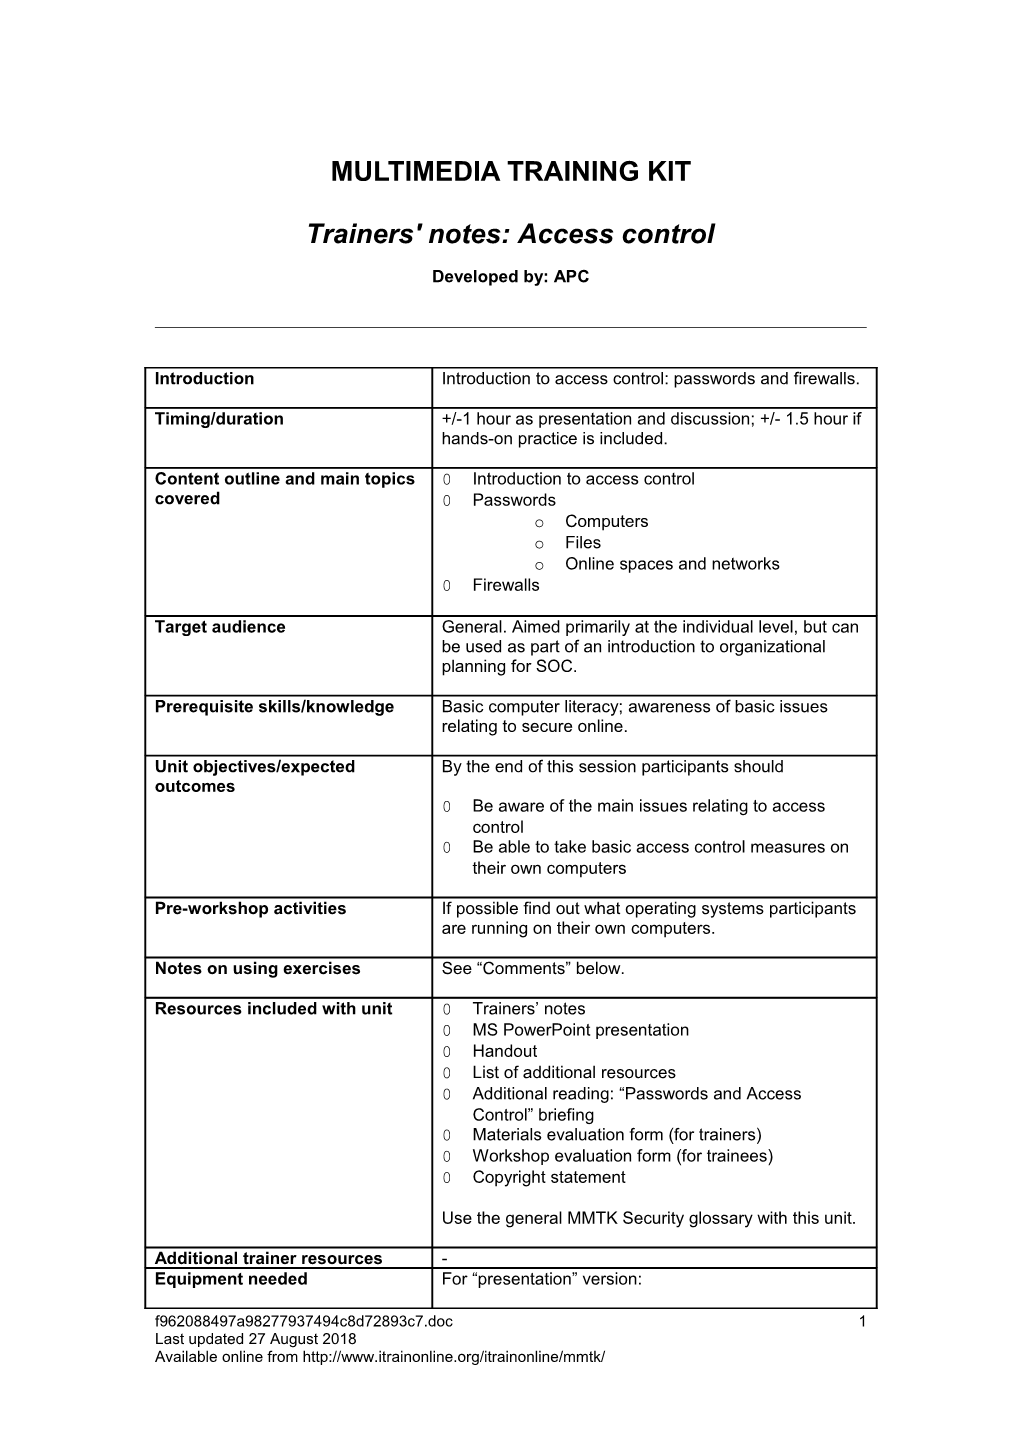 Trainers' Notes: Access Control